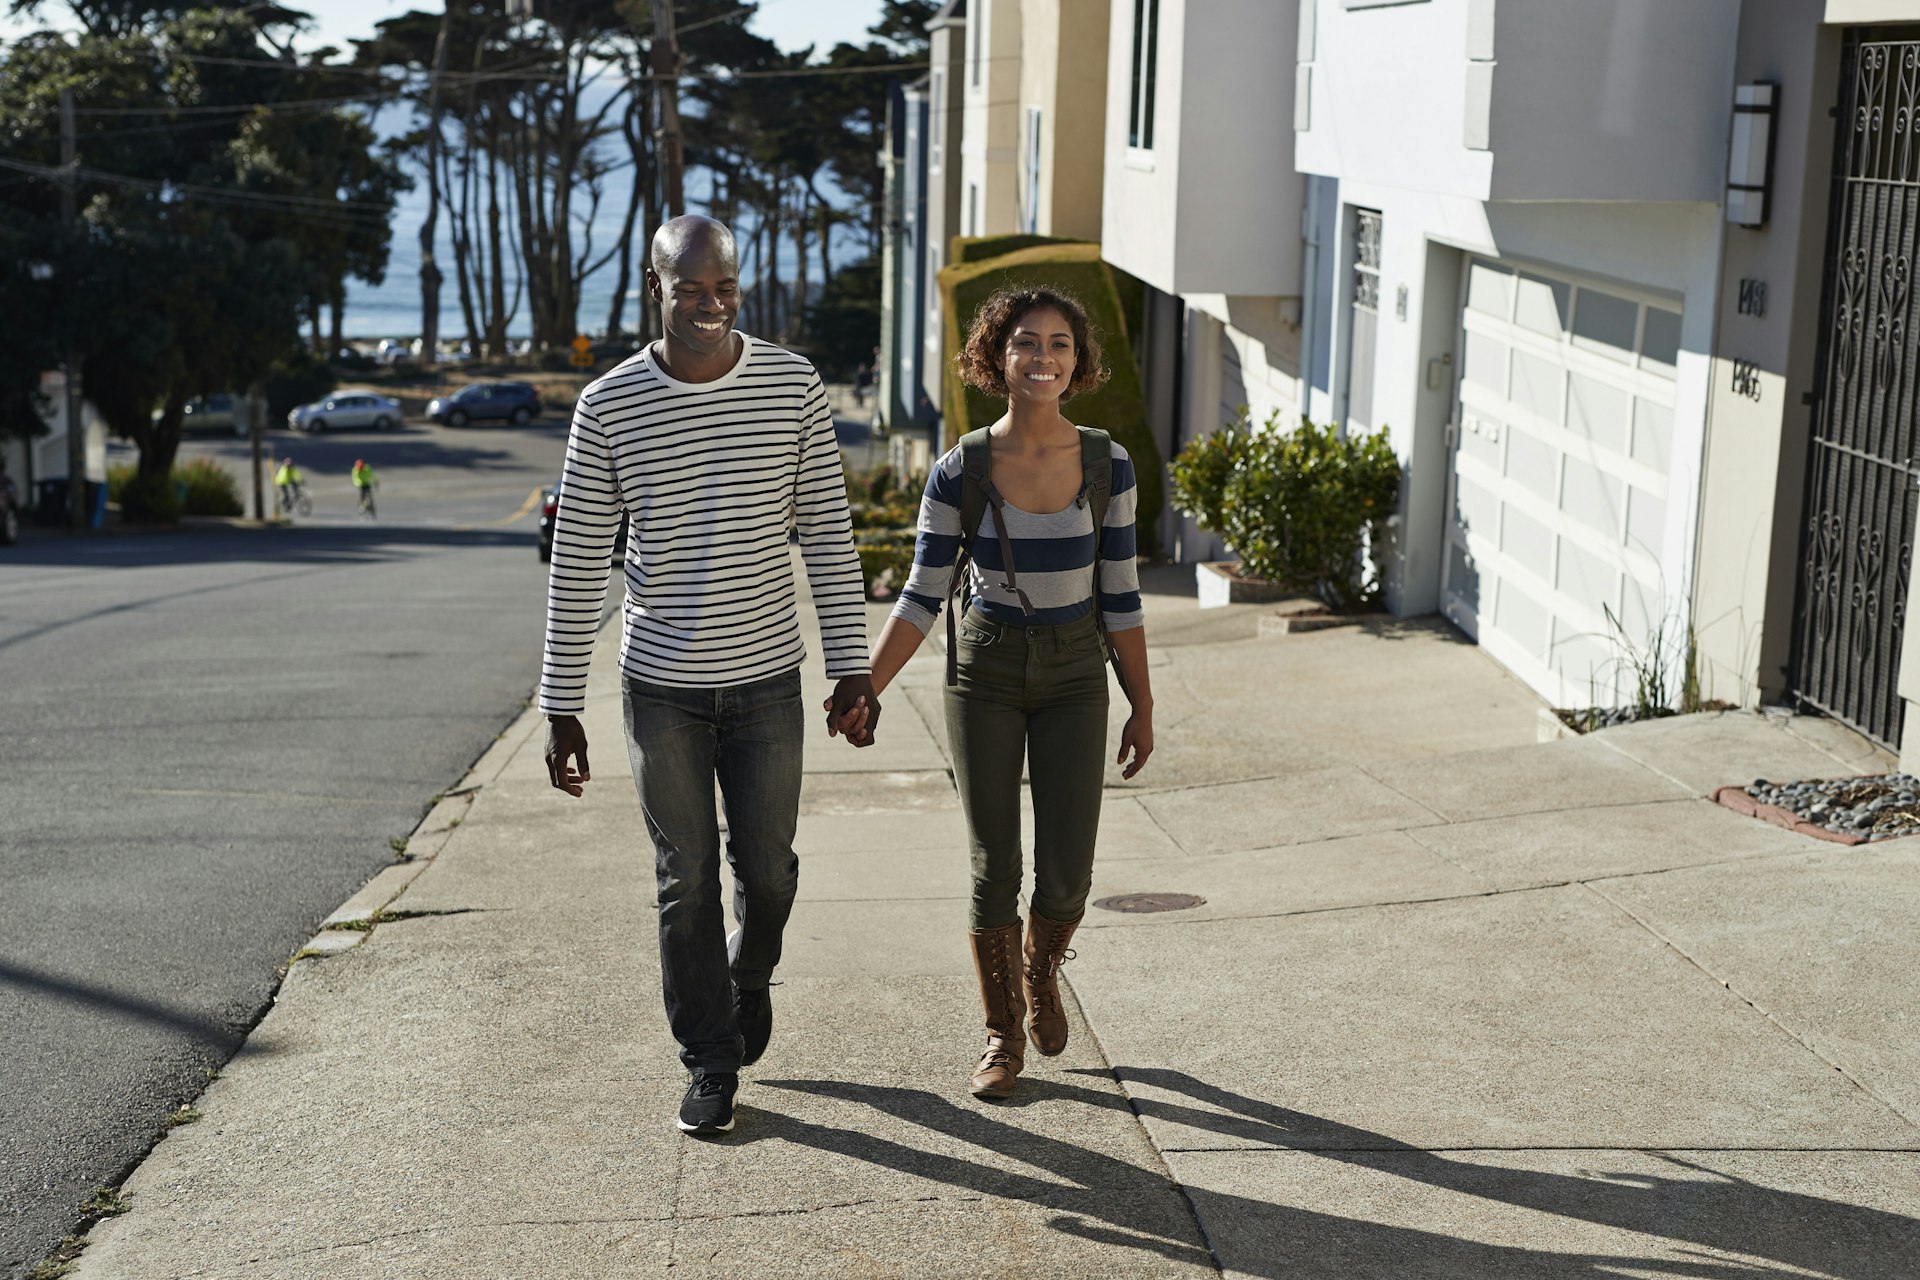 A smiling man and woman are walking hand in hand on a city sidewalk